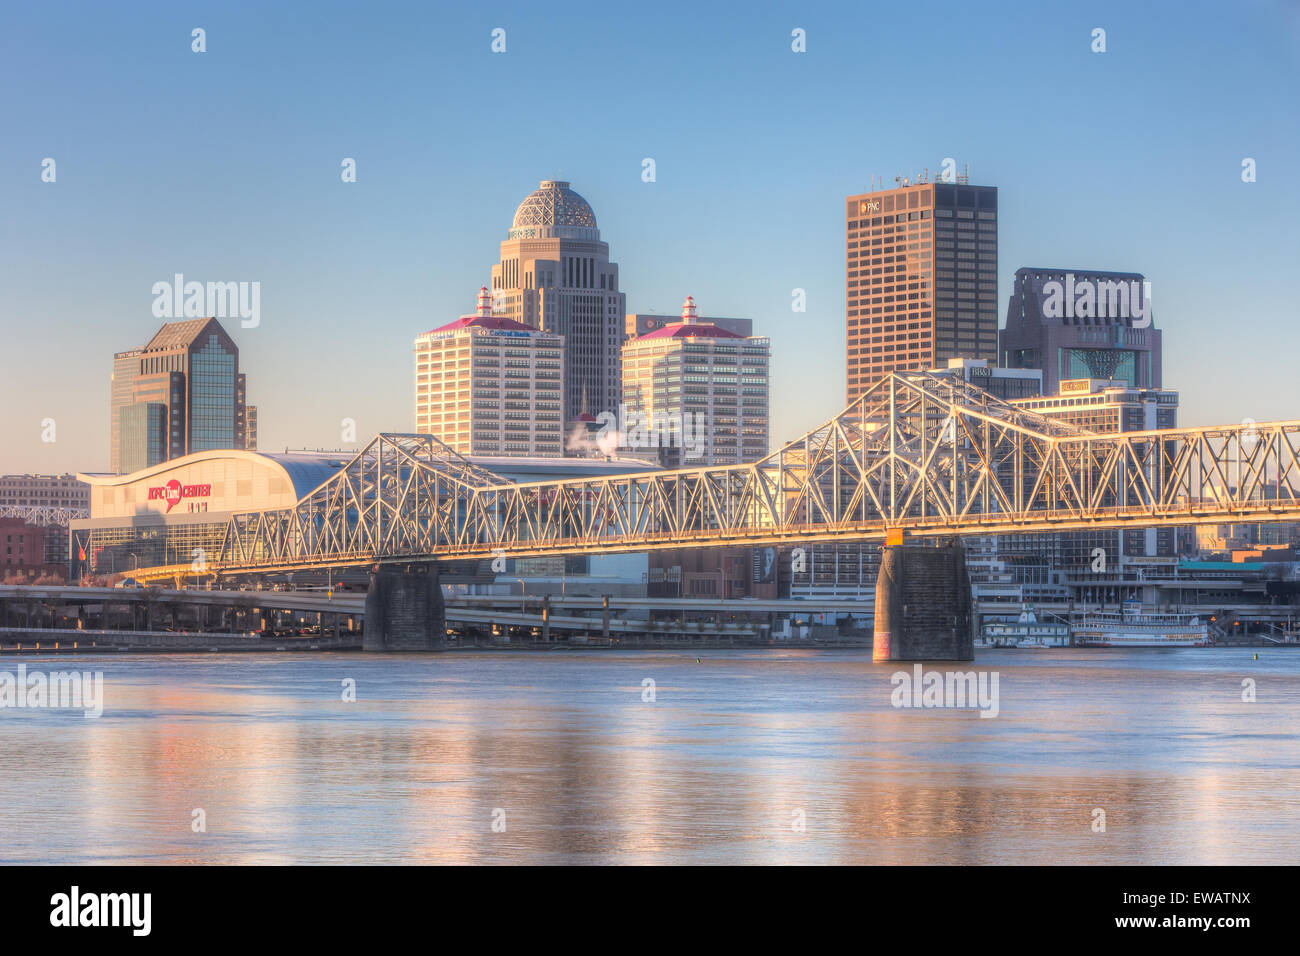 The George Rogers Clark Memorial Bridge crosses the Ohio River in front of the skyline of Louisville, Kentucky. Stock Photo